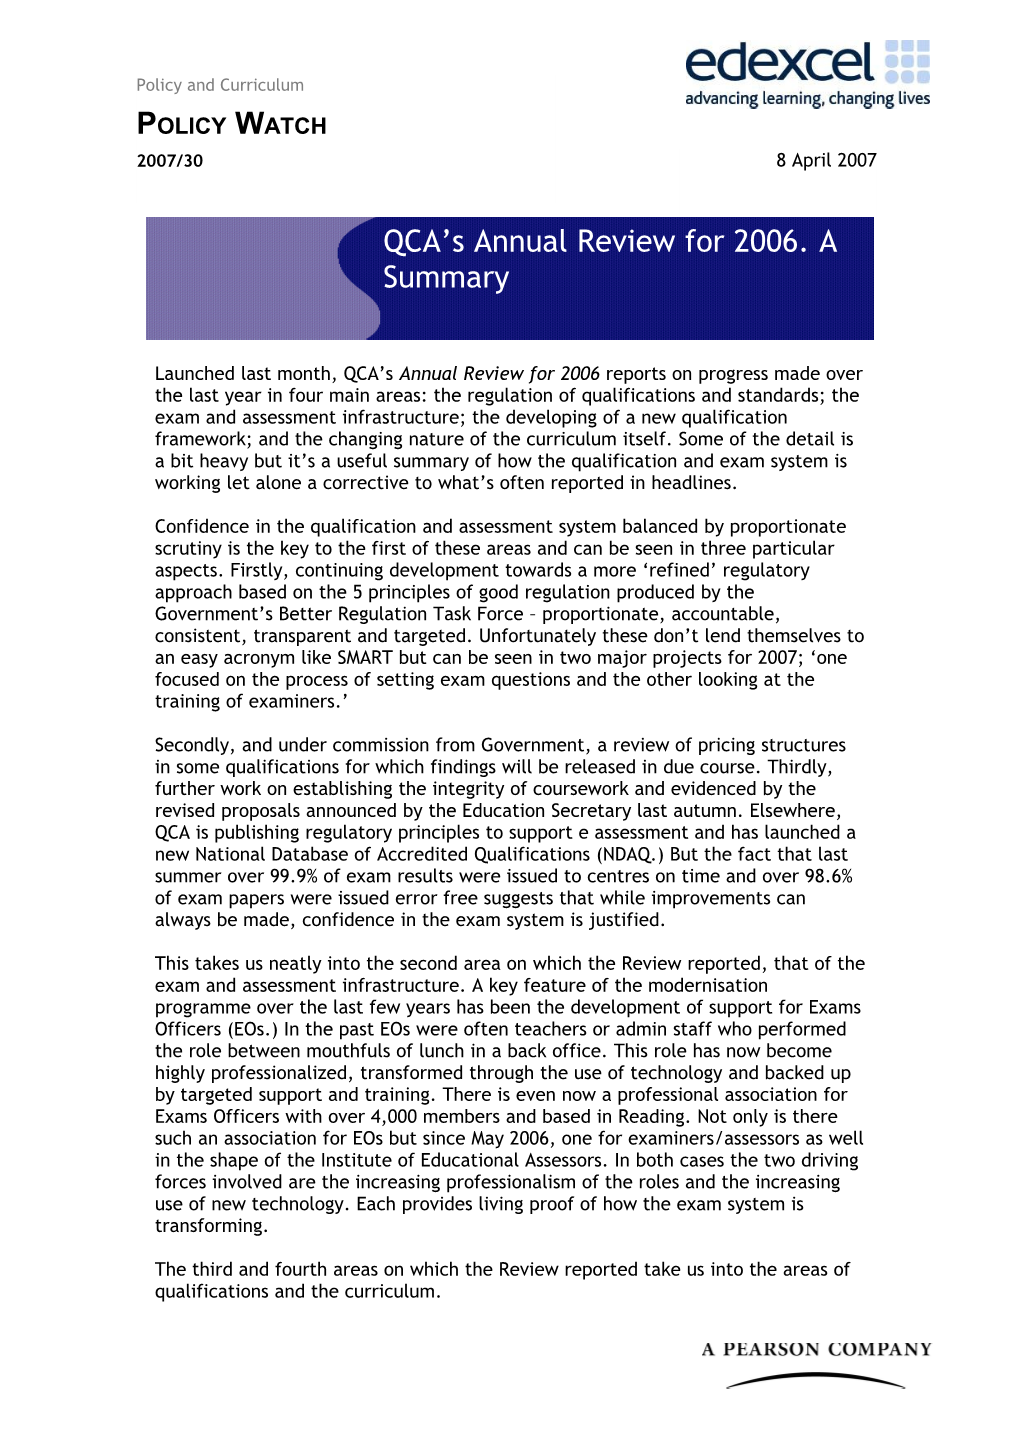 Launched Last Month, QCA S Annual Review for 2006 Reports on Progress Made Over the Last